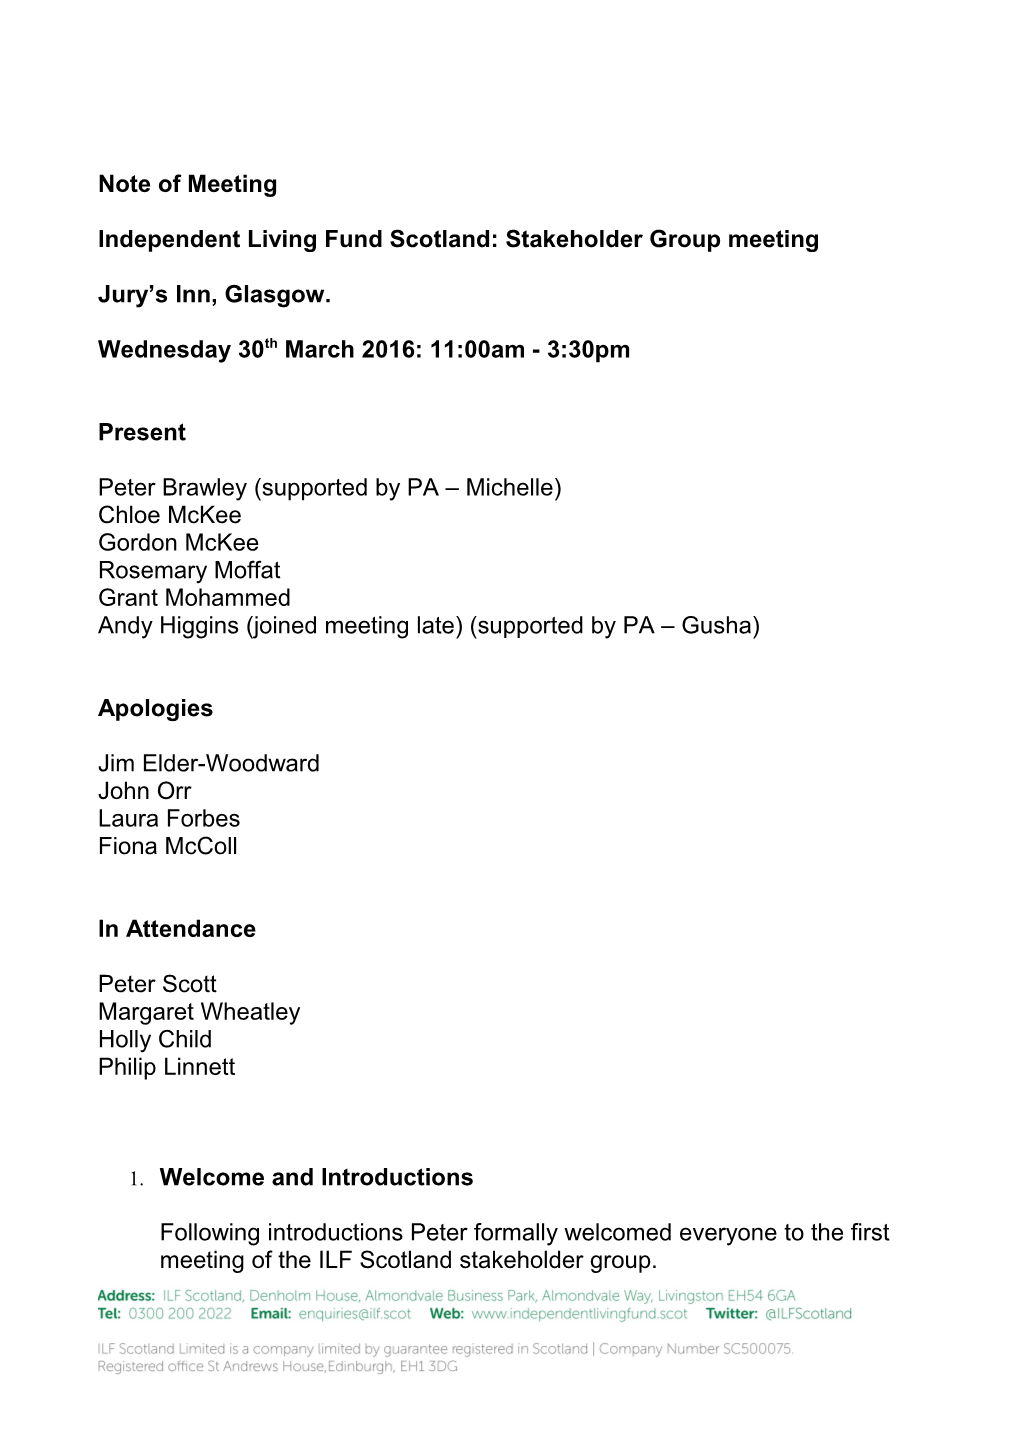 Independent Living Fund Scotland: Stakeholder Group Meeting